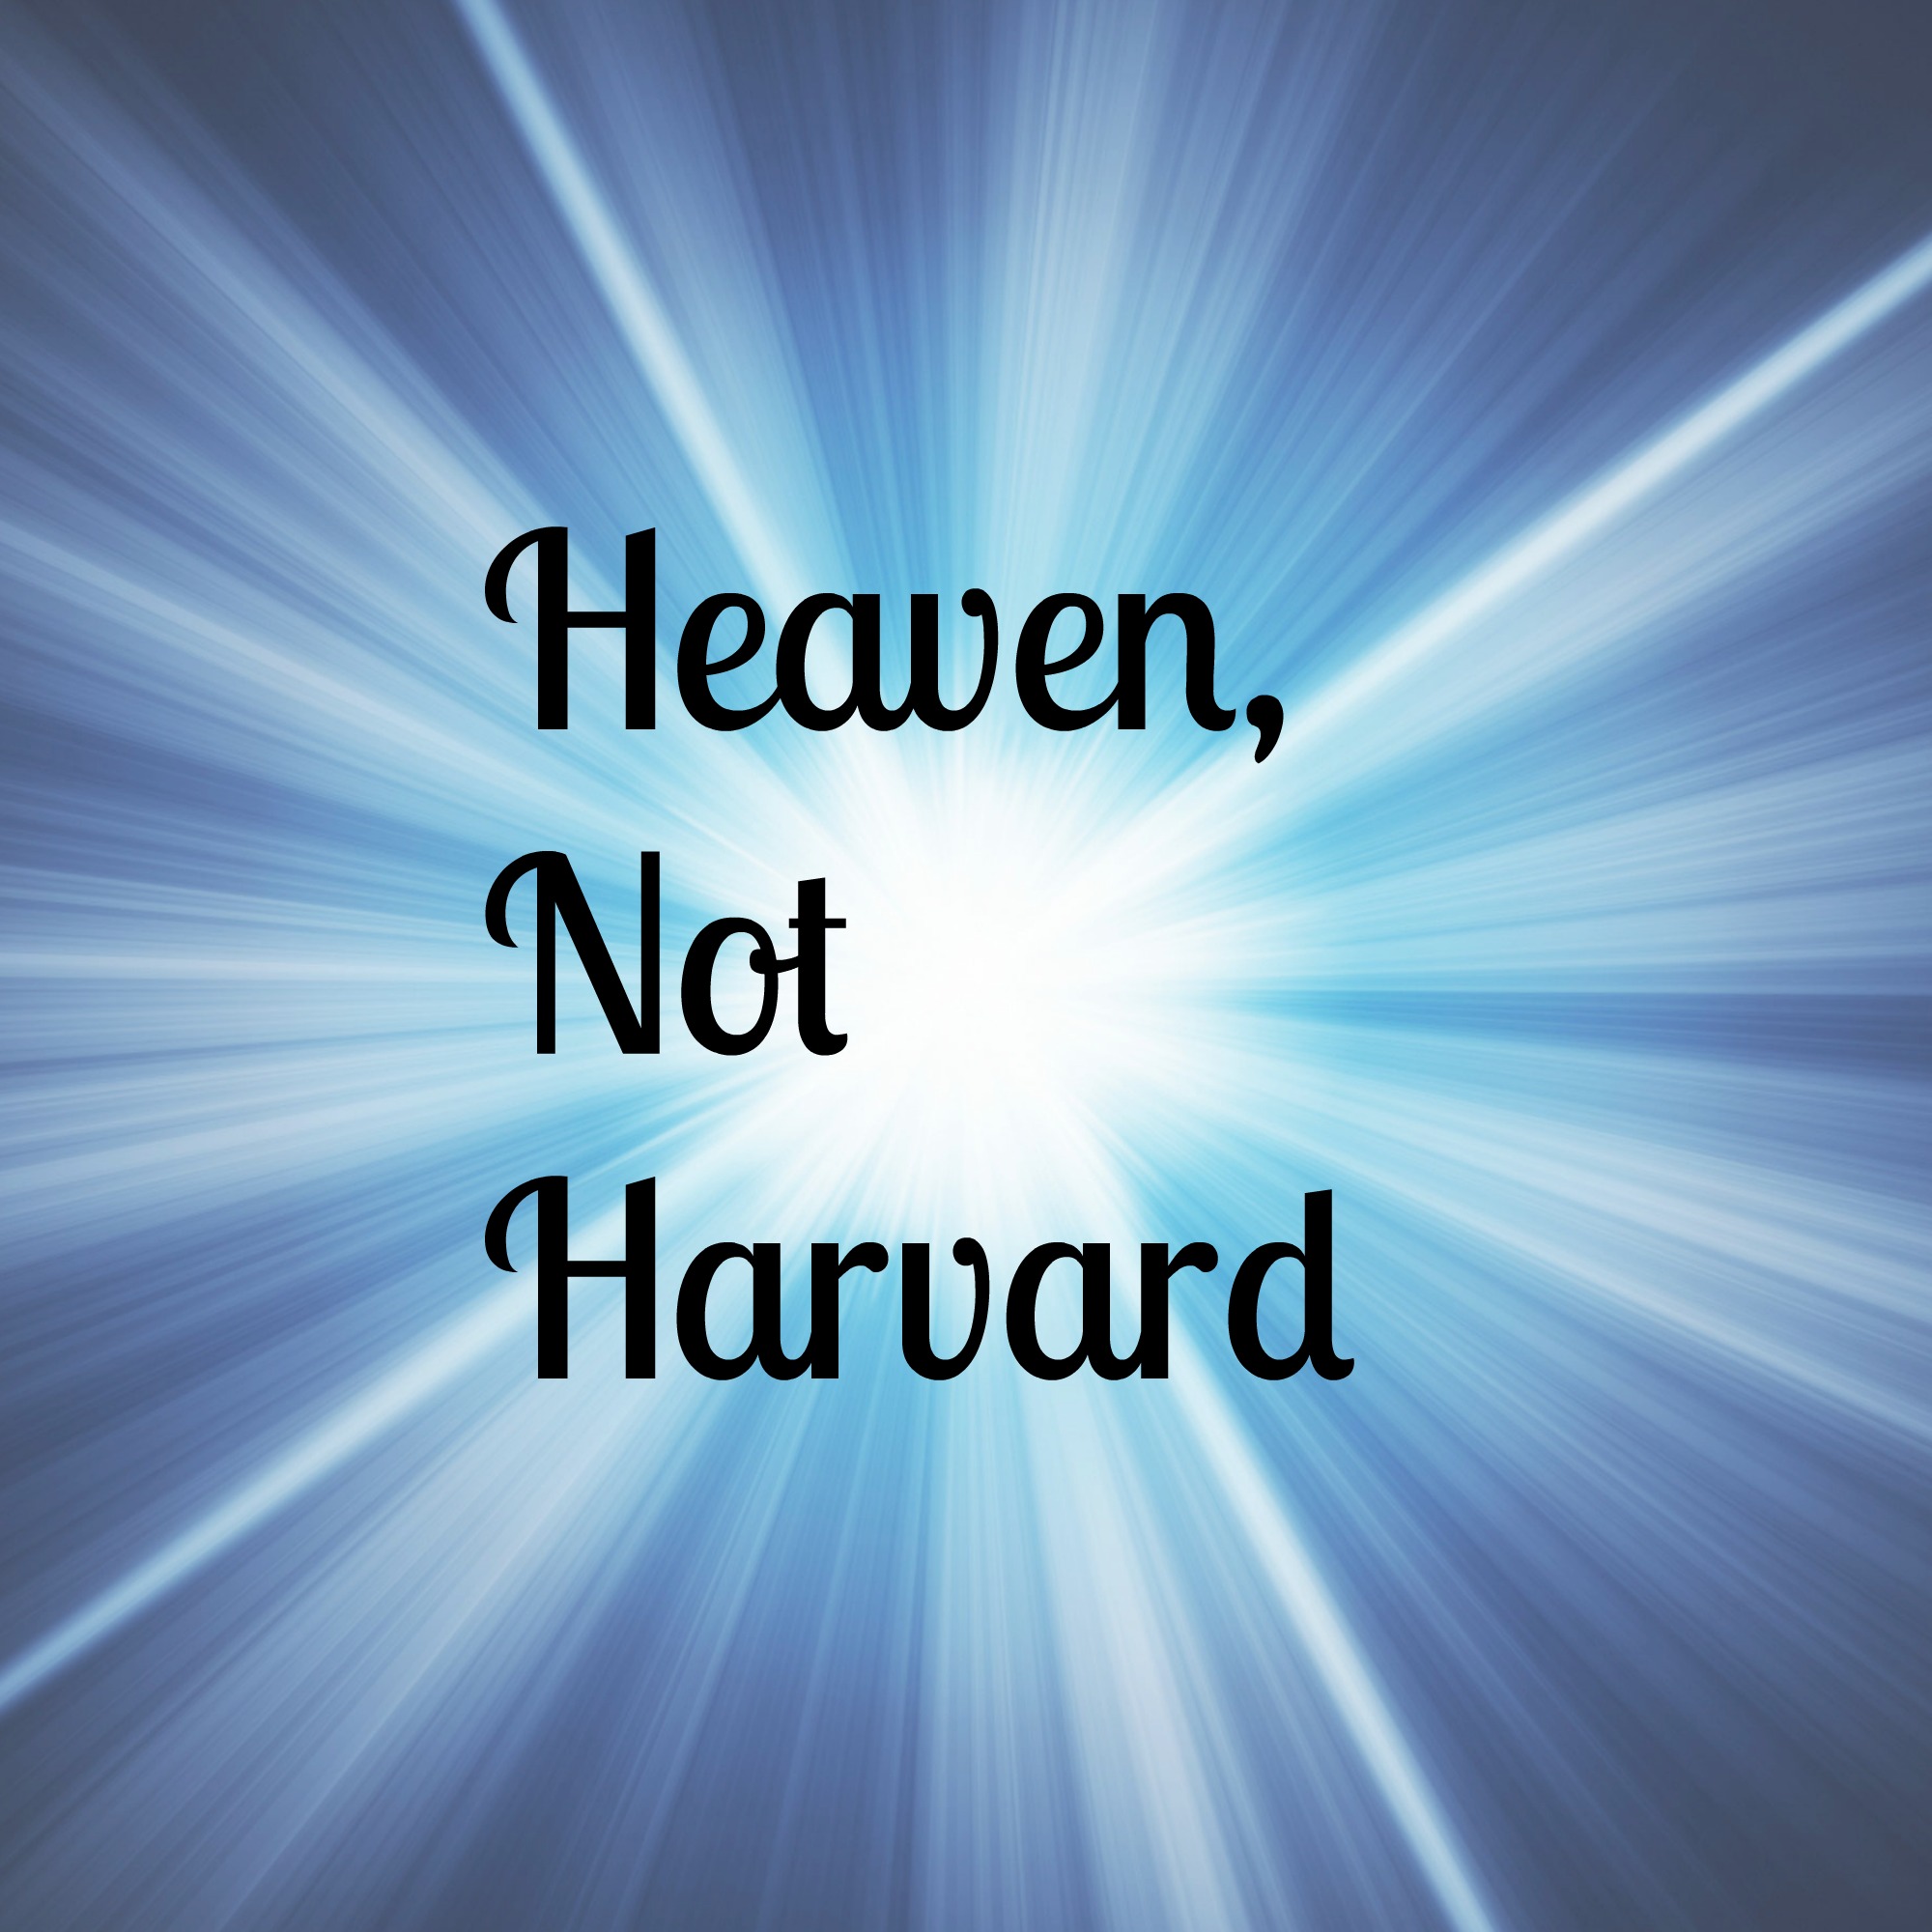 Top Someone In Heaven Quotes of the decade Learn more here 